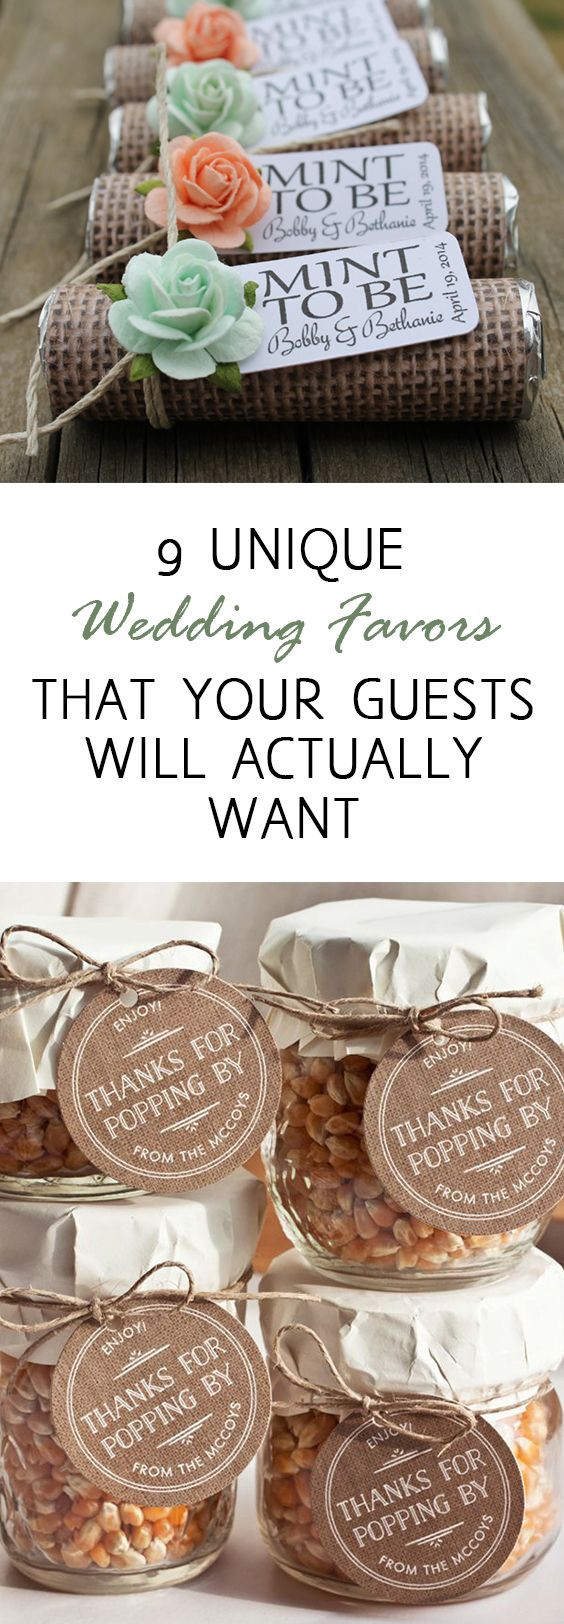 Diy Wedding Favors Ideas
 9 Unique Wedding Favors that Your Guests Will Actually